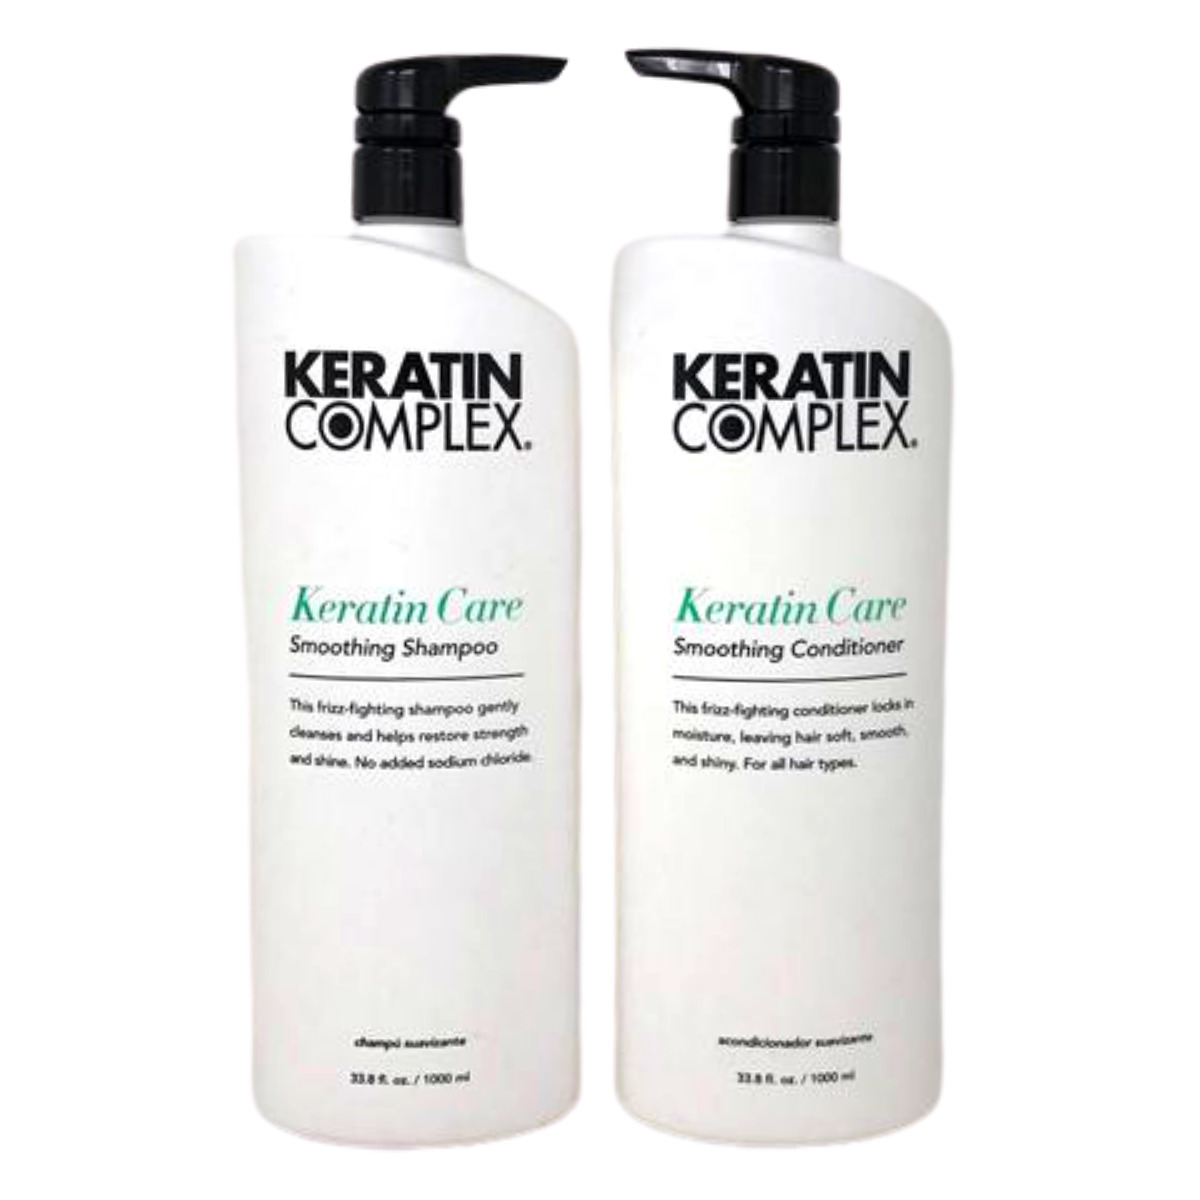 Keratin Complex Care Smoothing Shampoo and Conditioner 33.8 oz NEW PACKAGE